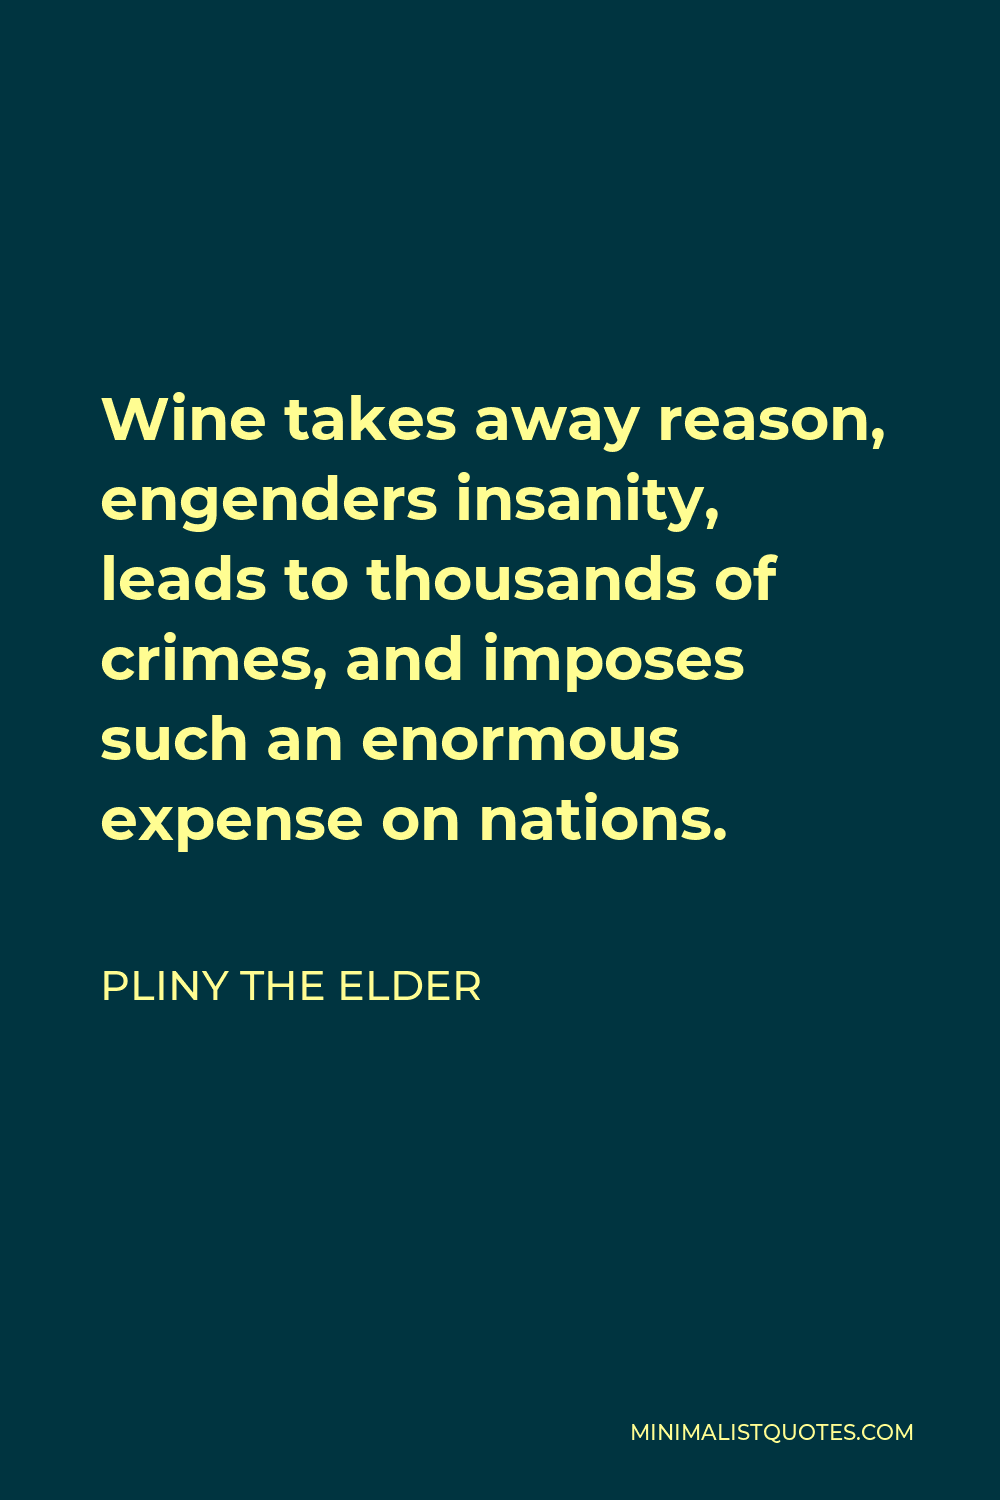 Pliny the Elder Quote - Wine takes away reason, engenders insanity, leads to thousands of crimes, and imposes such an enormous expense on nations.